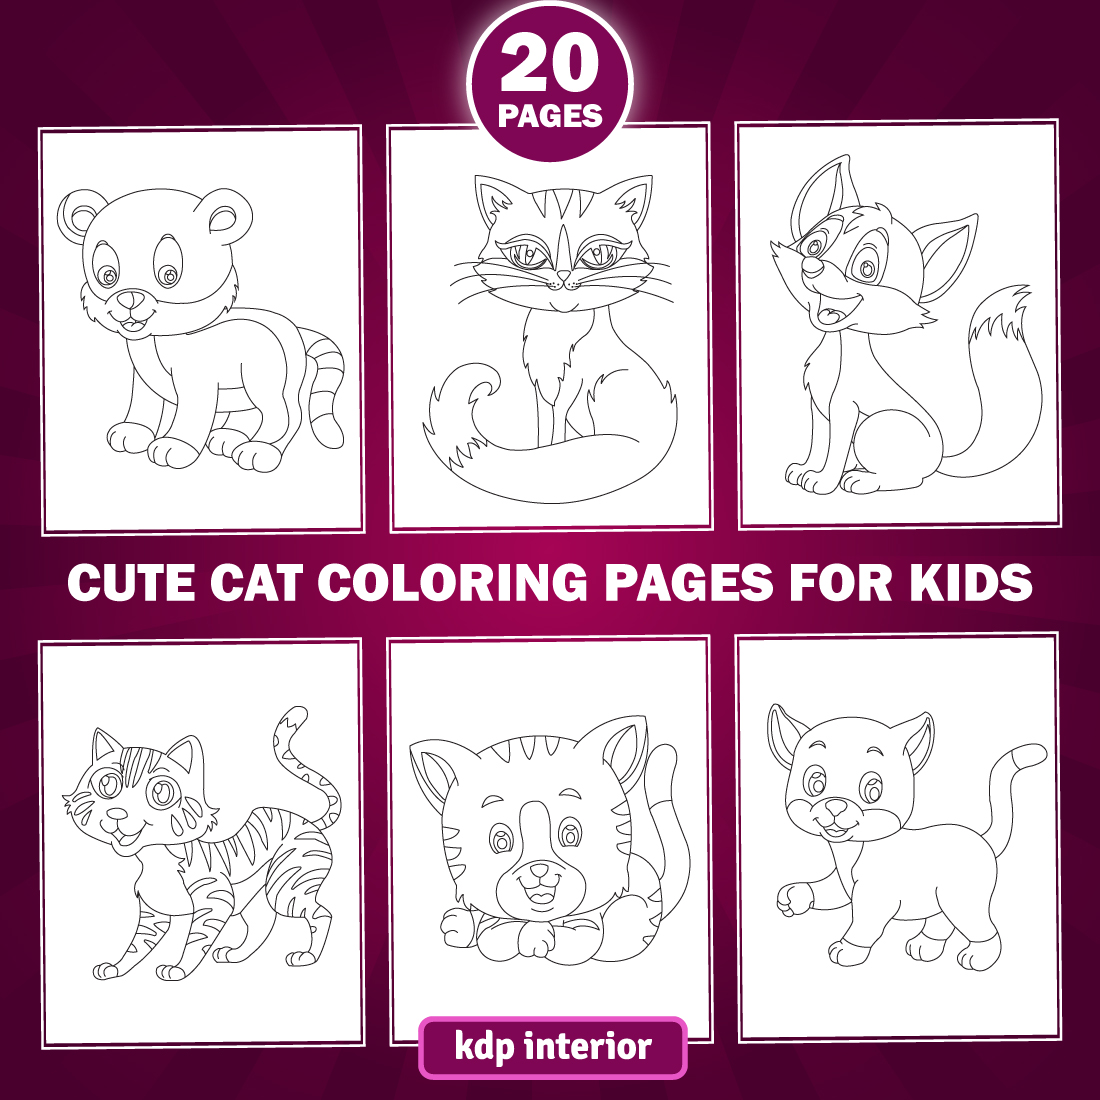 20 Cute Cat Coloring Pages for KDP Interior for Kids and Adult cover image.